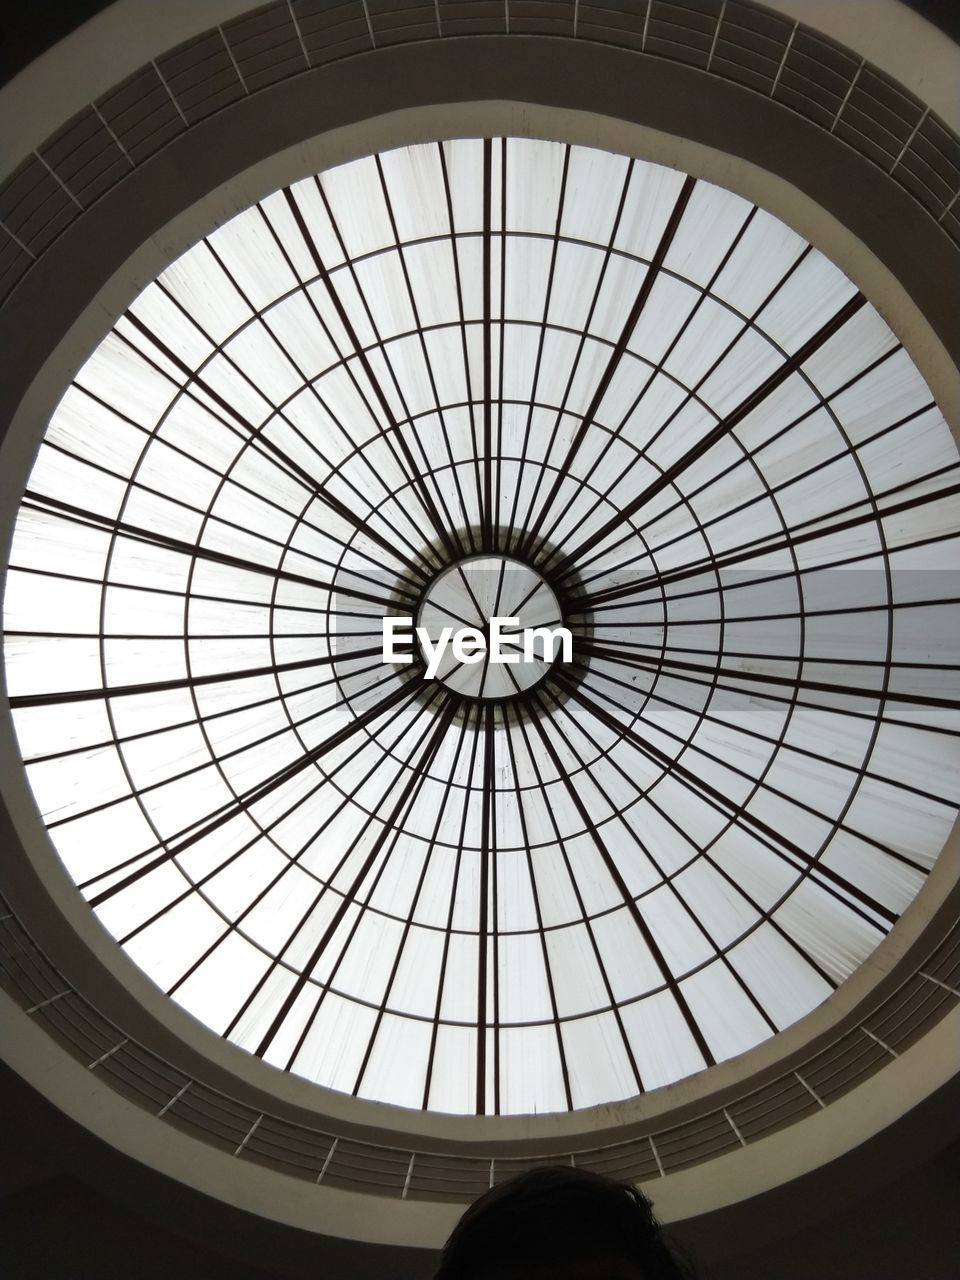 skylight, architecture, indoors, built structure, daylighting, dome, geometric shape, shape, glass, ceiling, low angle view, directly below, circle, no people, pattern, window, sunlight, day, cupola, architectural feature, wheel, spiral, city